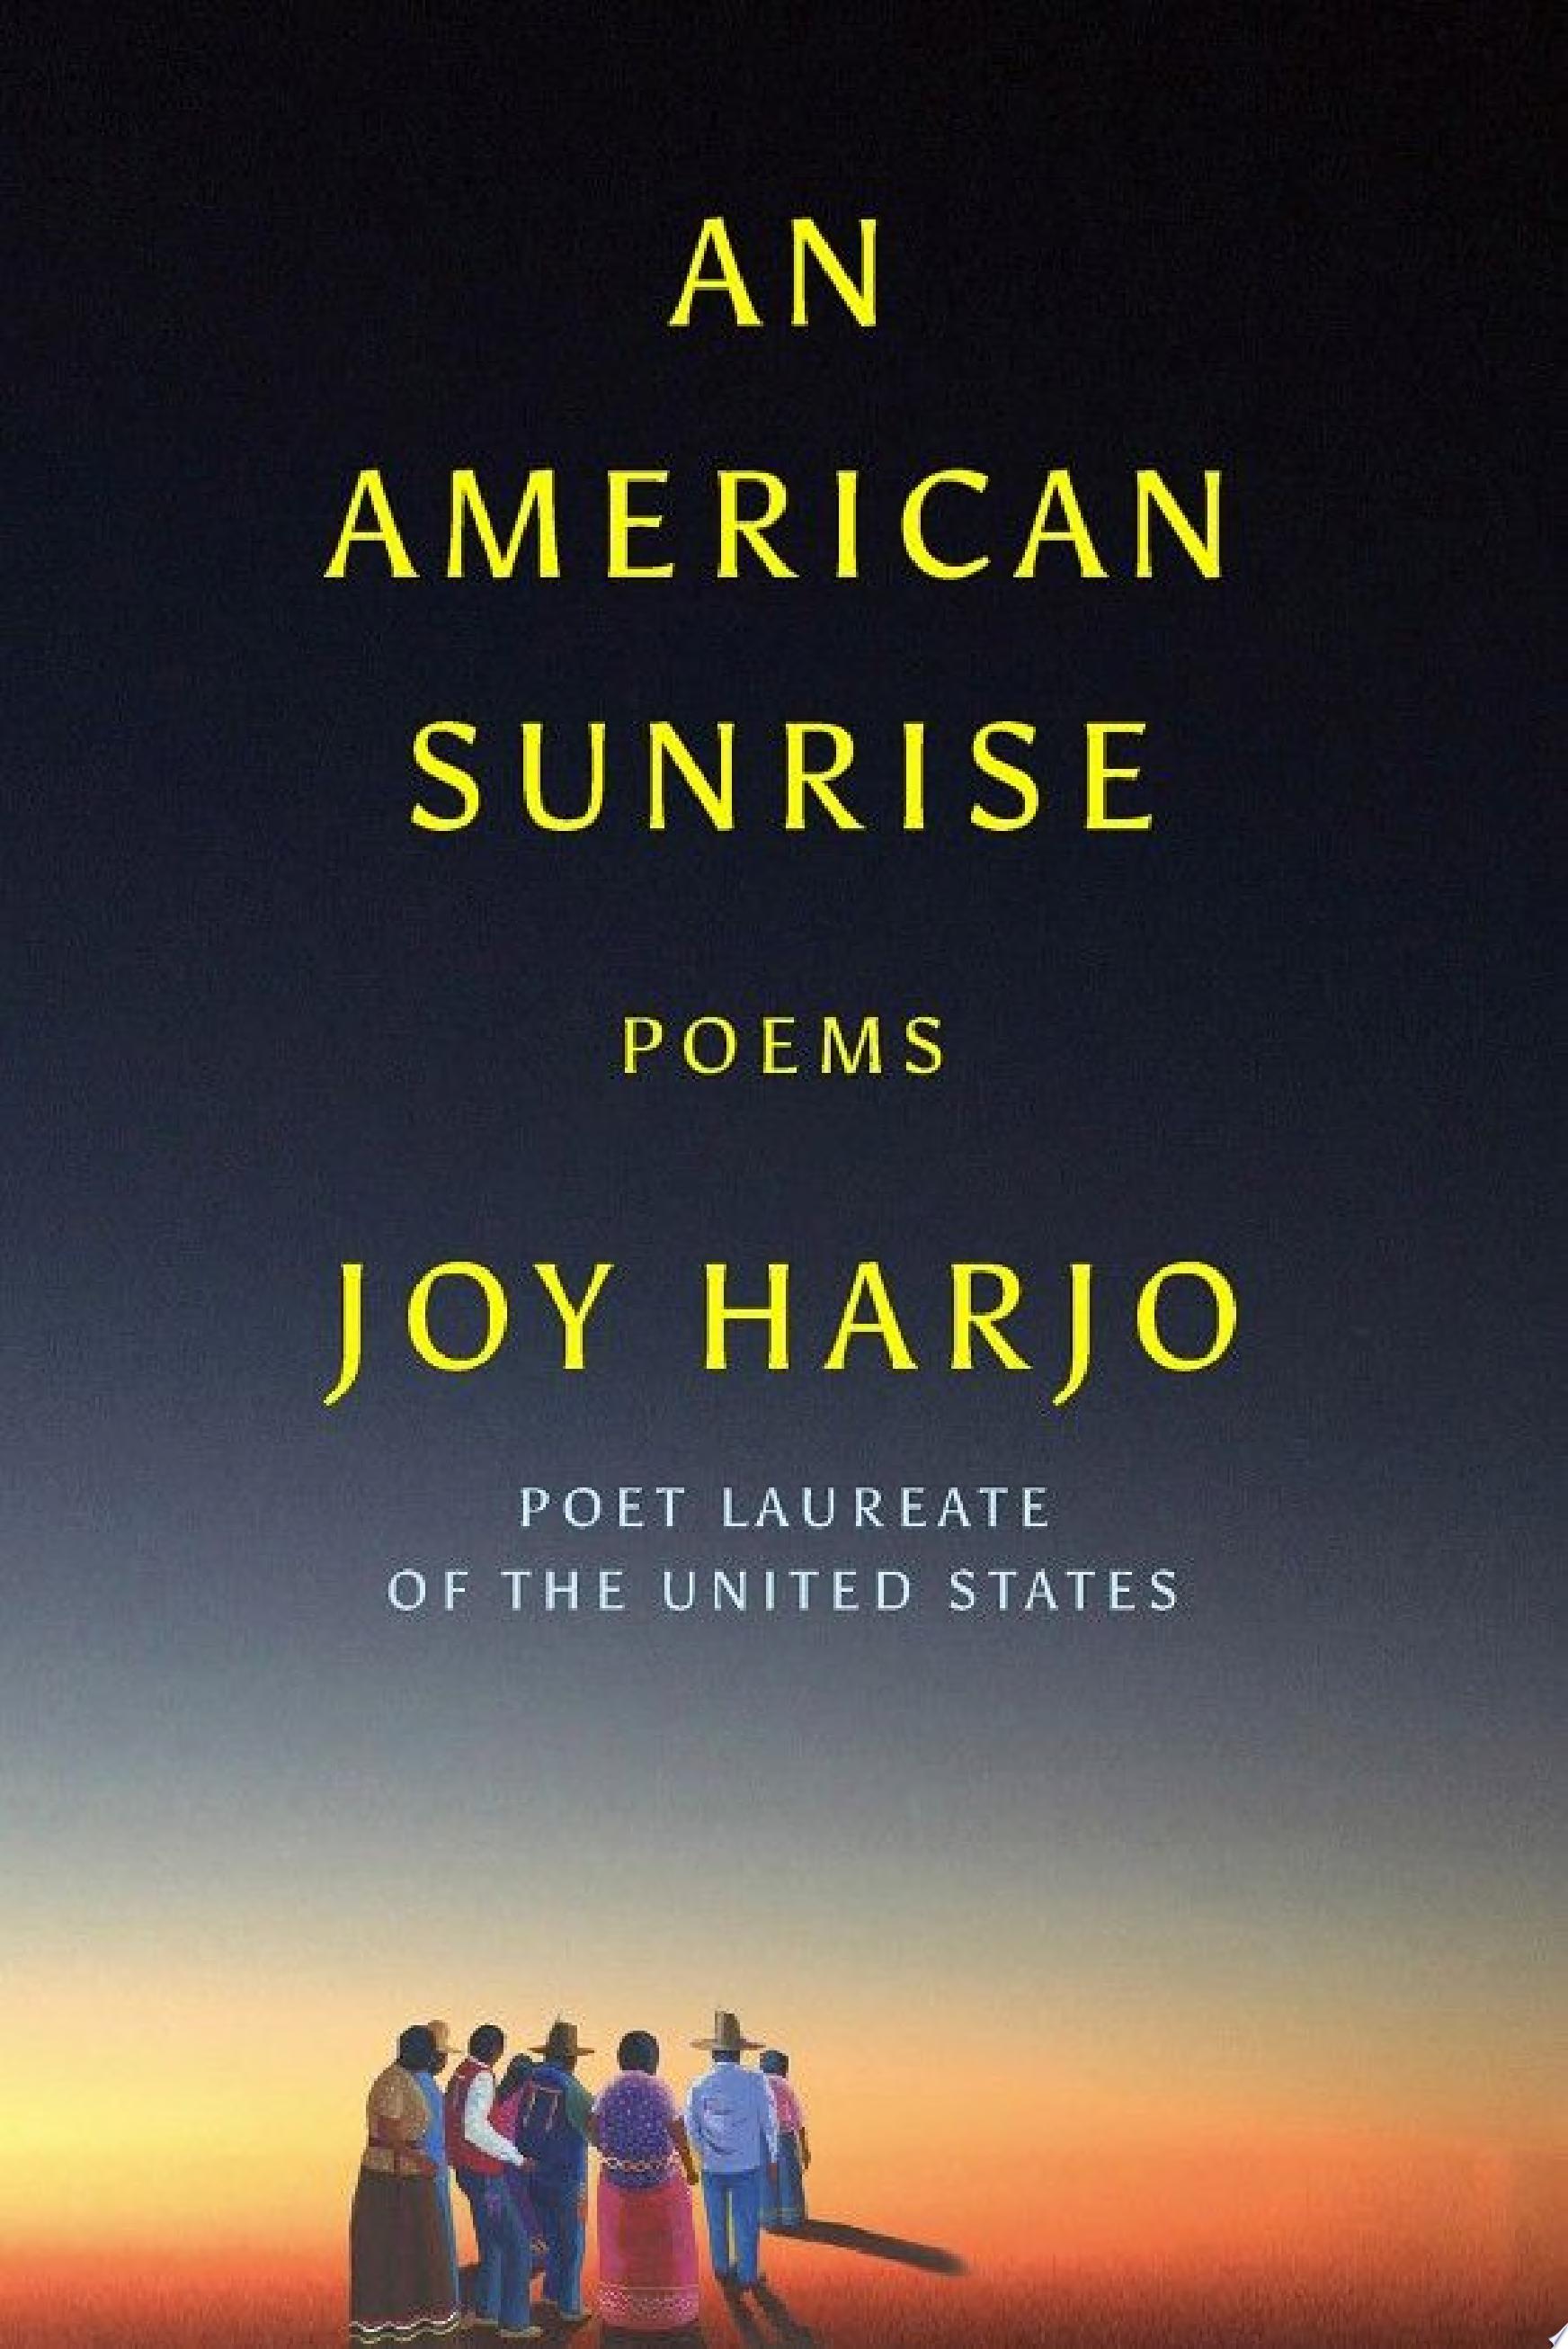 Image for "An American Sunrise: Poems"